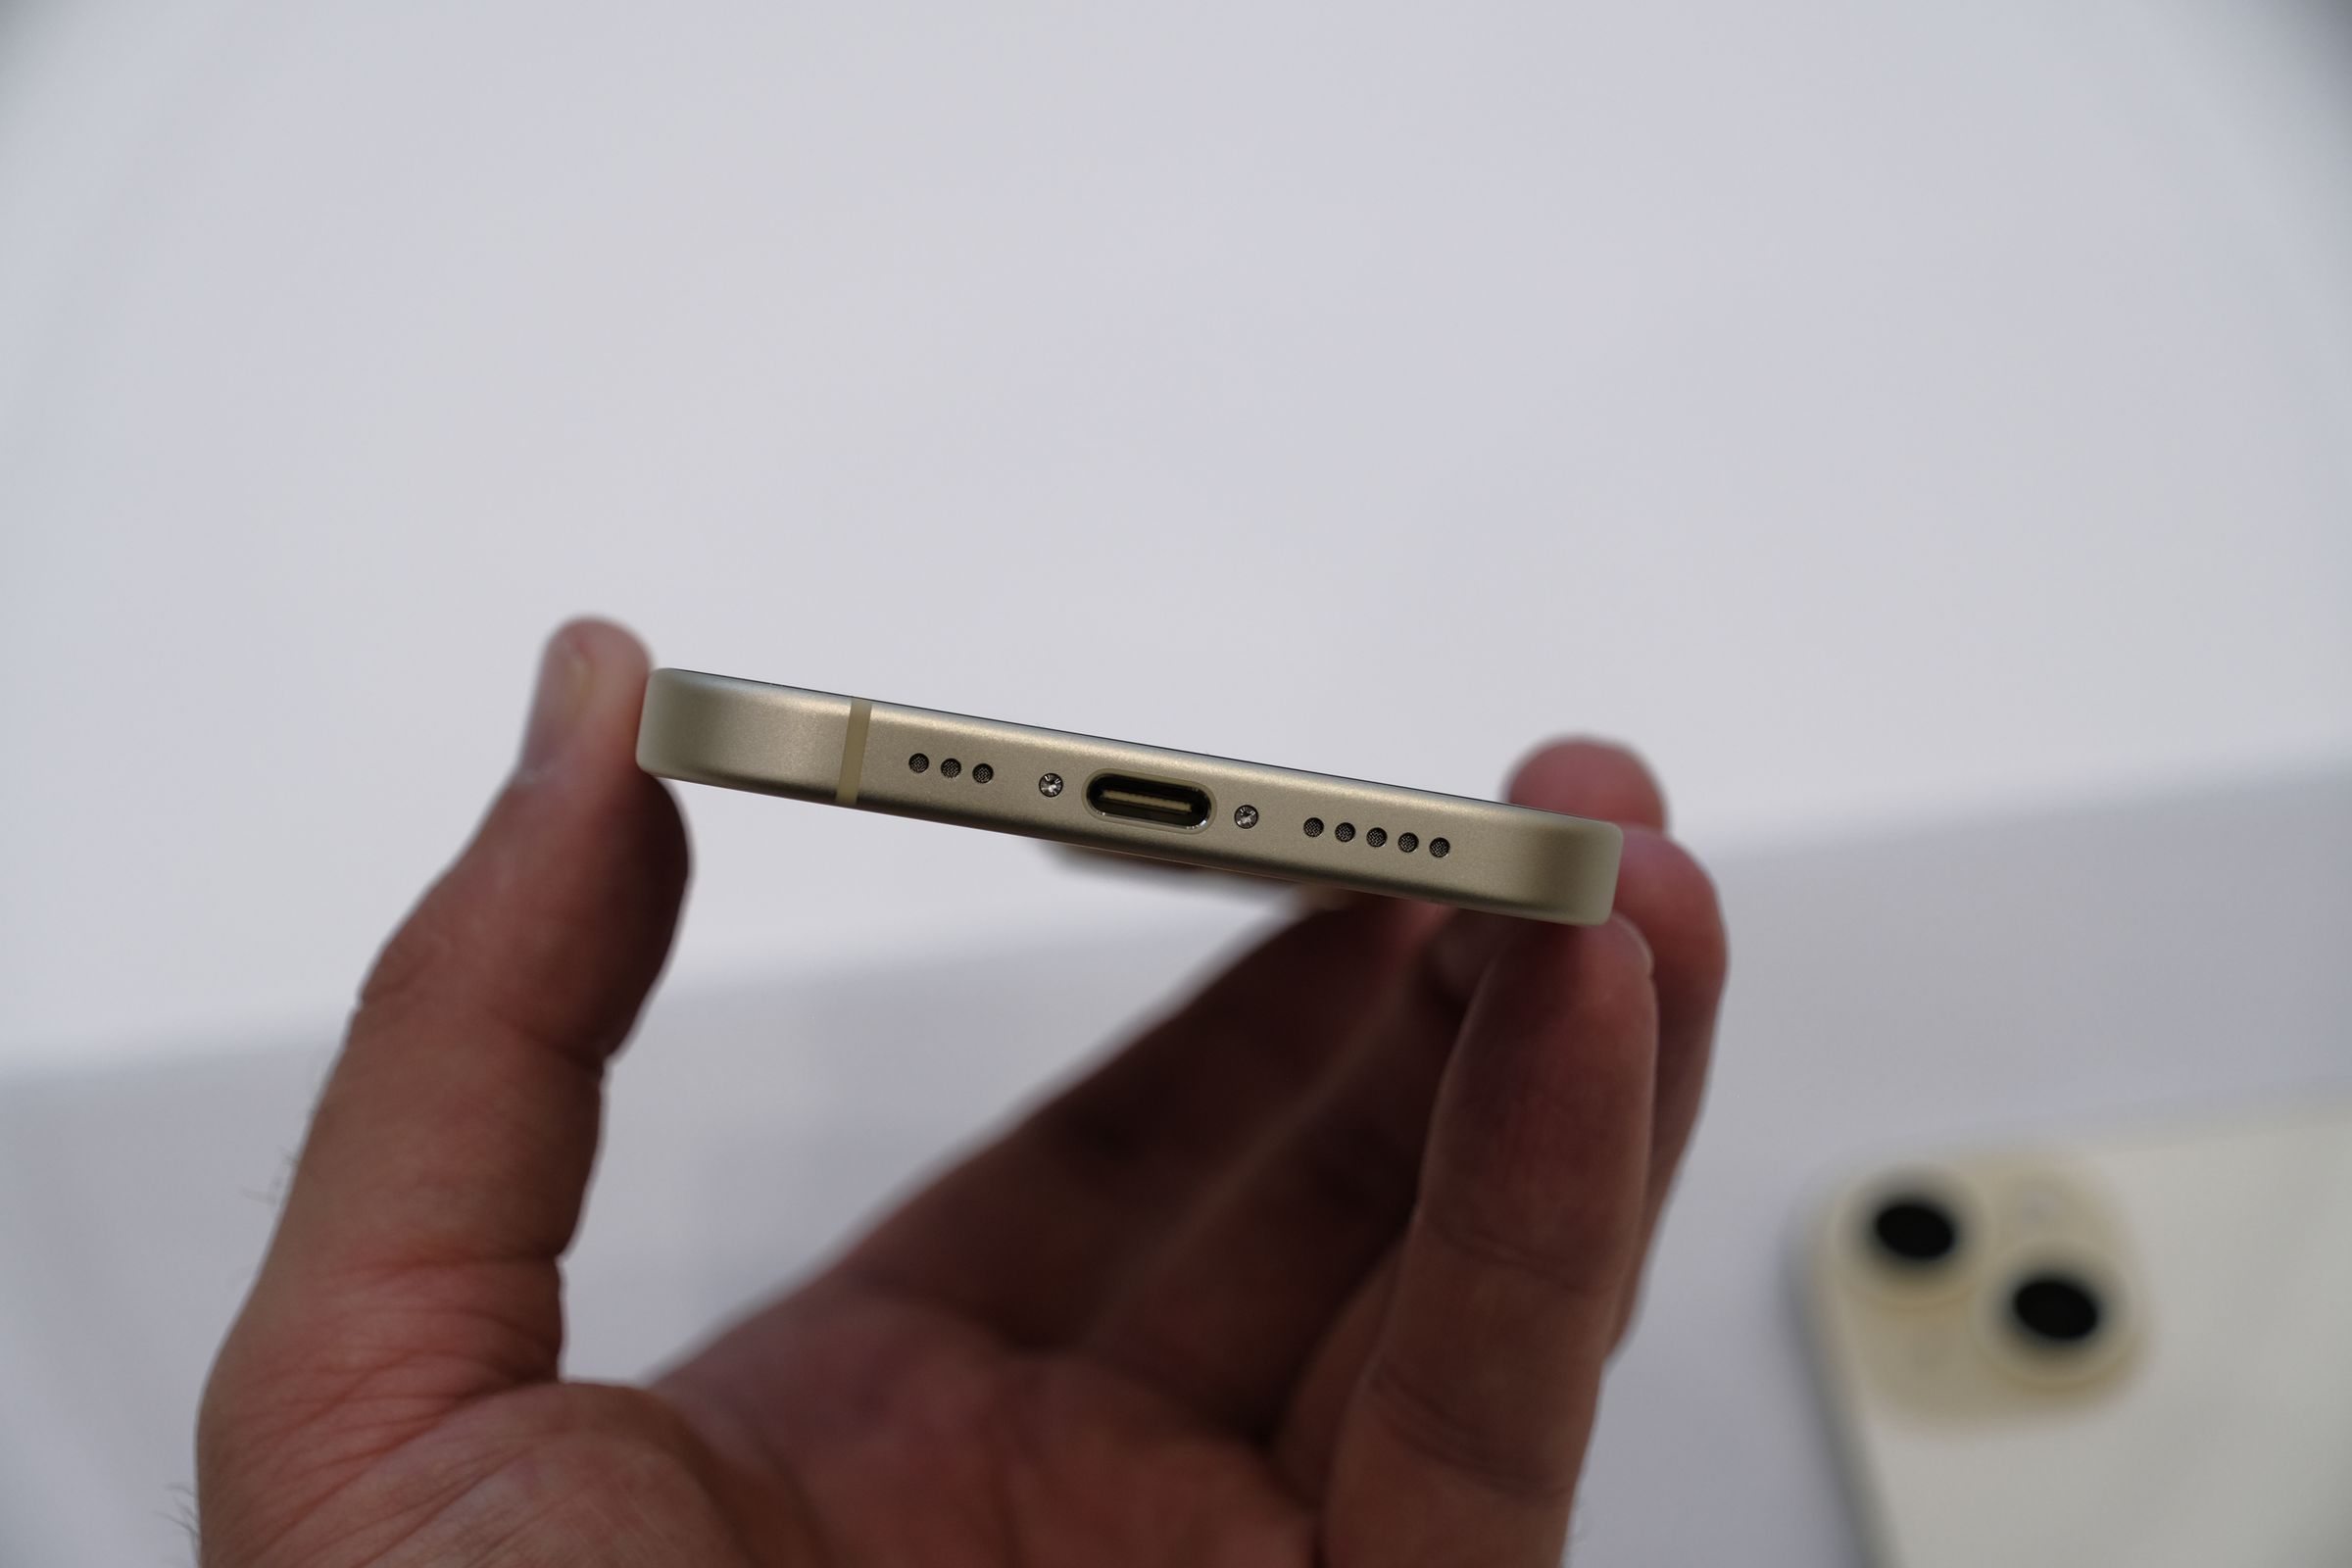 Yes, it really is USB-C on an iPhone.